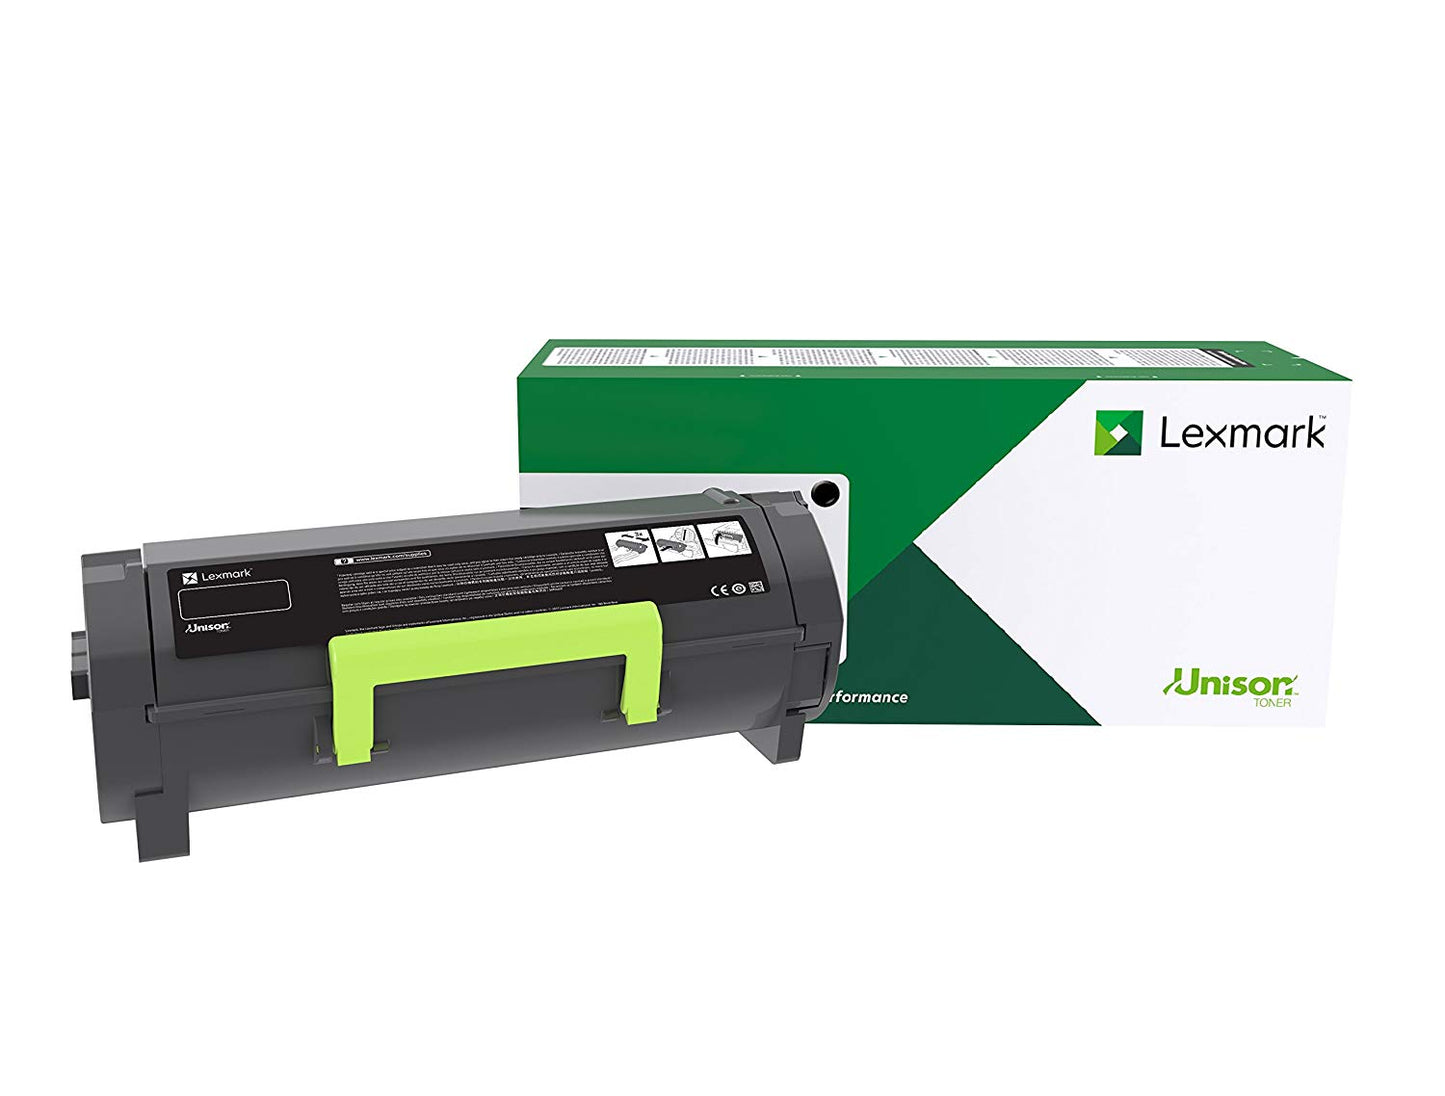 OEM Lexmark 56F0XA0 Extra High Yield Toner Cartridge for MS421, MS521, MS621, MS622, MX421, MX521, MX522, MX622 [20,000 Pages]